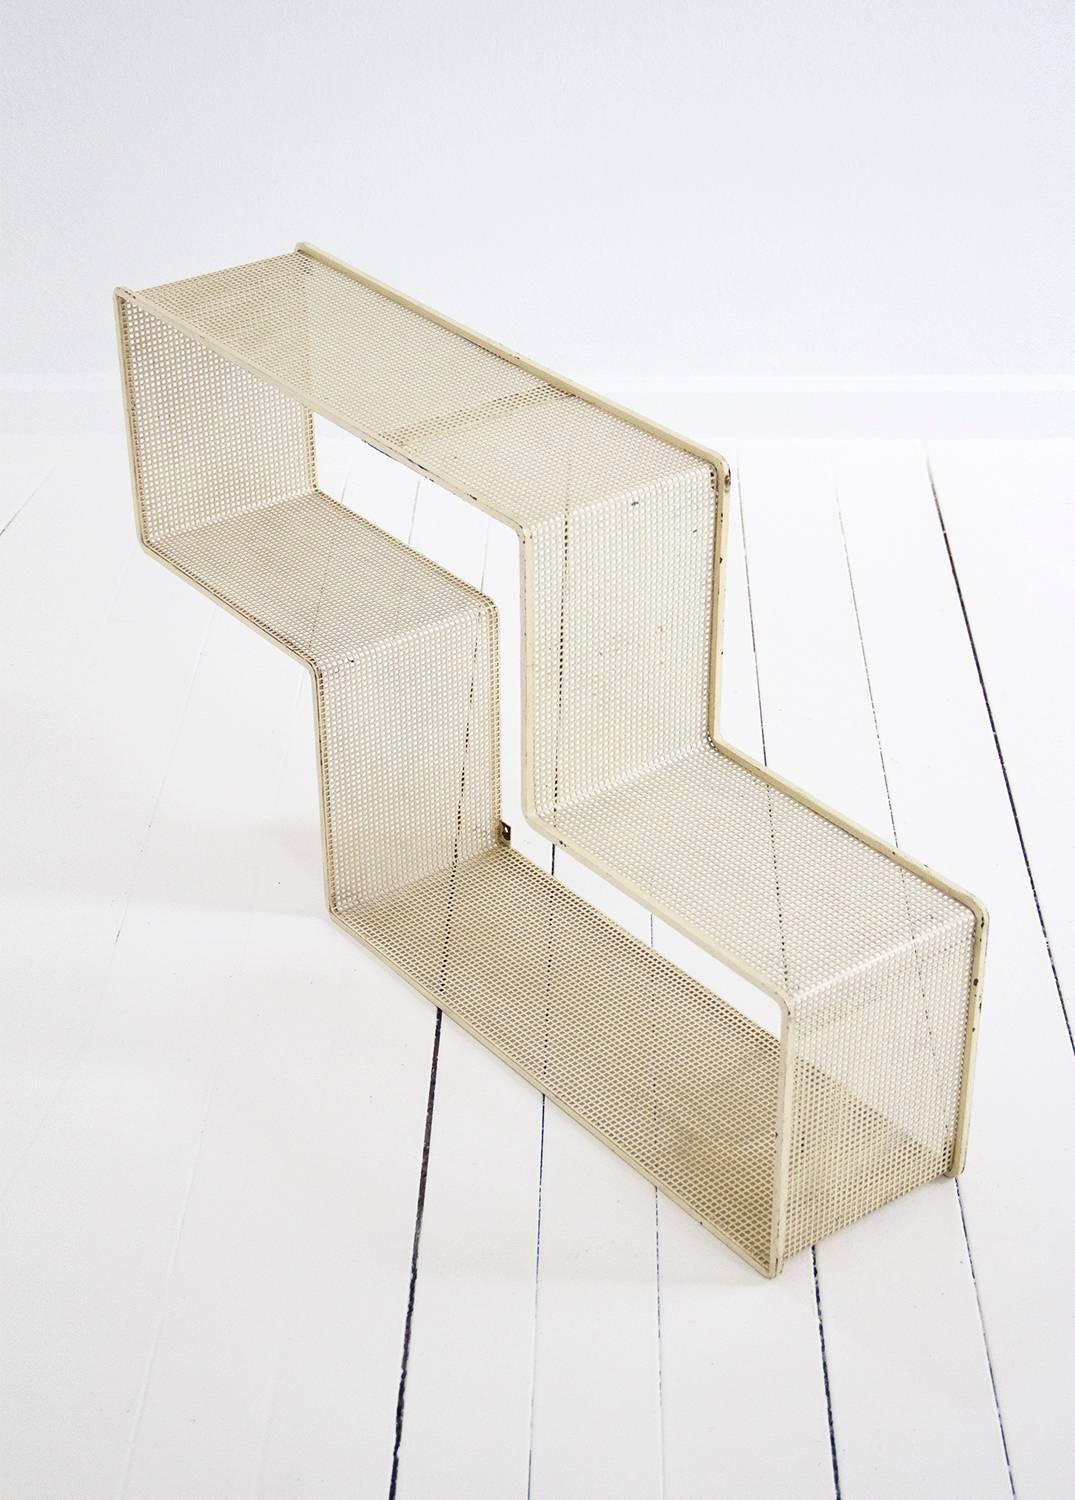 Mid-20th Century Dedal Wall Shelf by Mathieu Mategot, Perforated Steel, France, circa 1950 For Sale